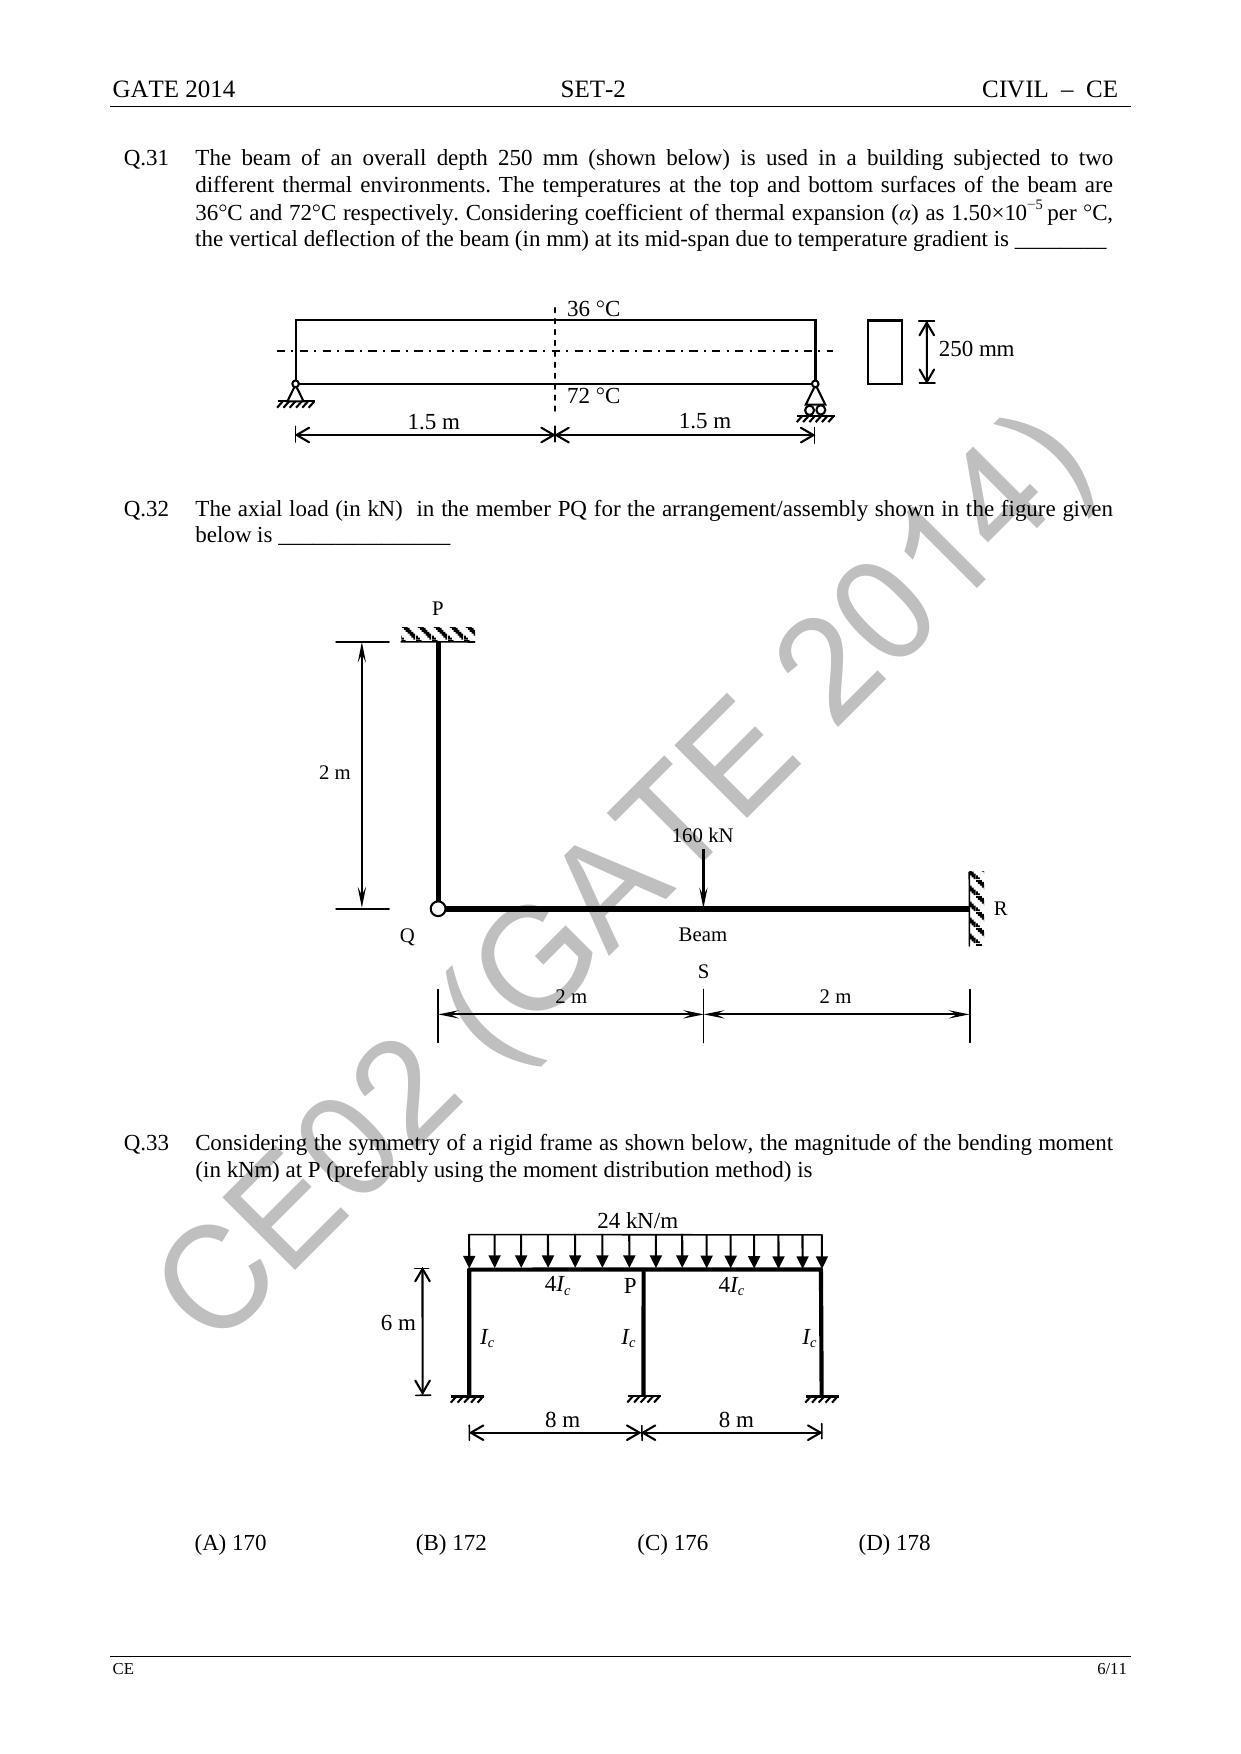 GATE 2014 Civil Engineering (CE) Question Paper with Answer Key - Page 34